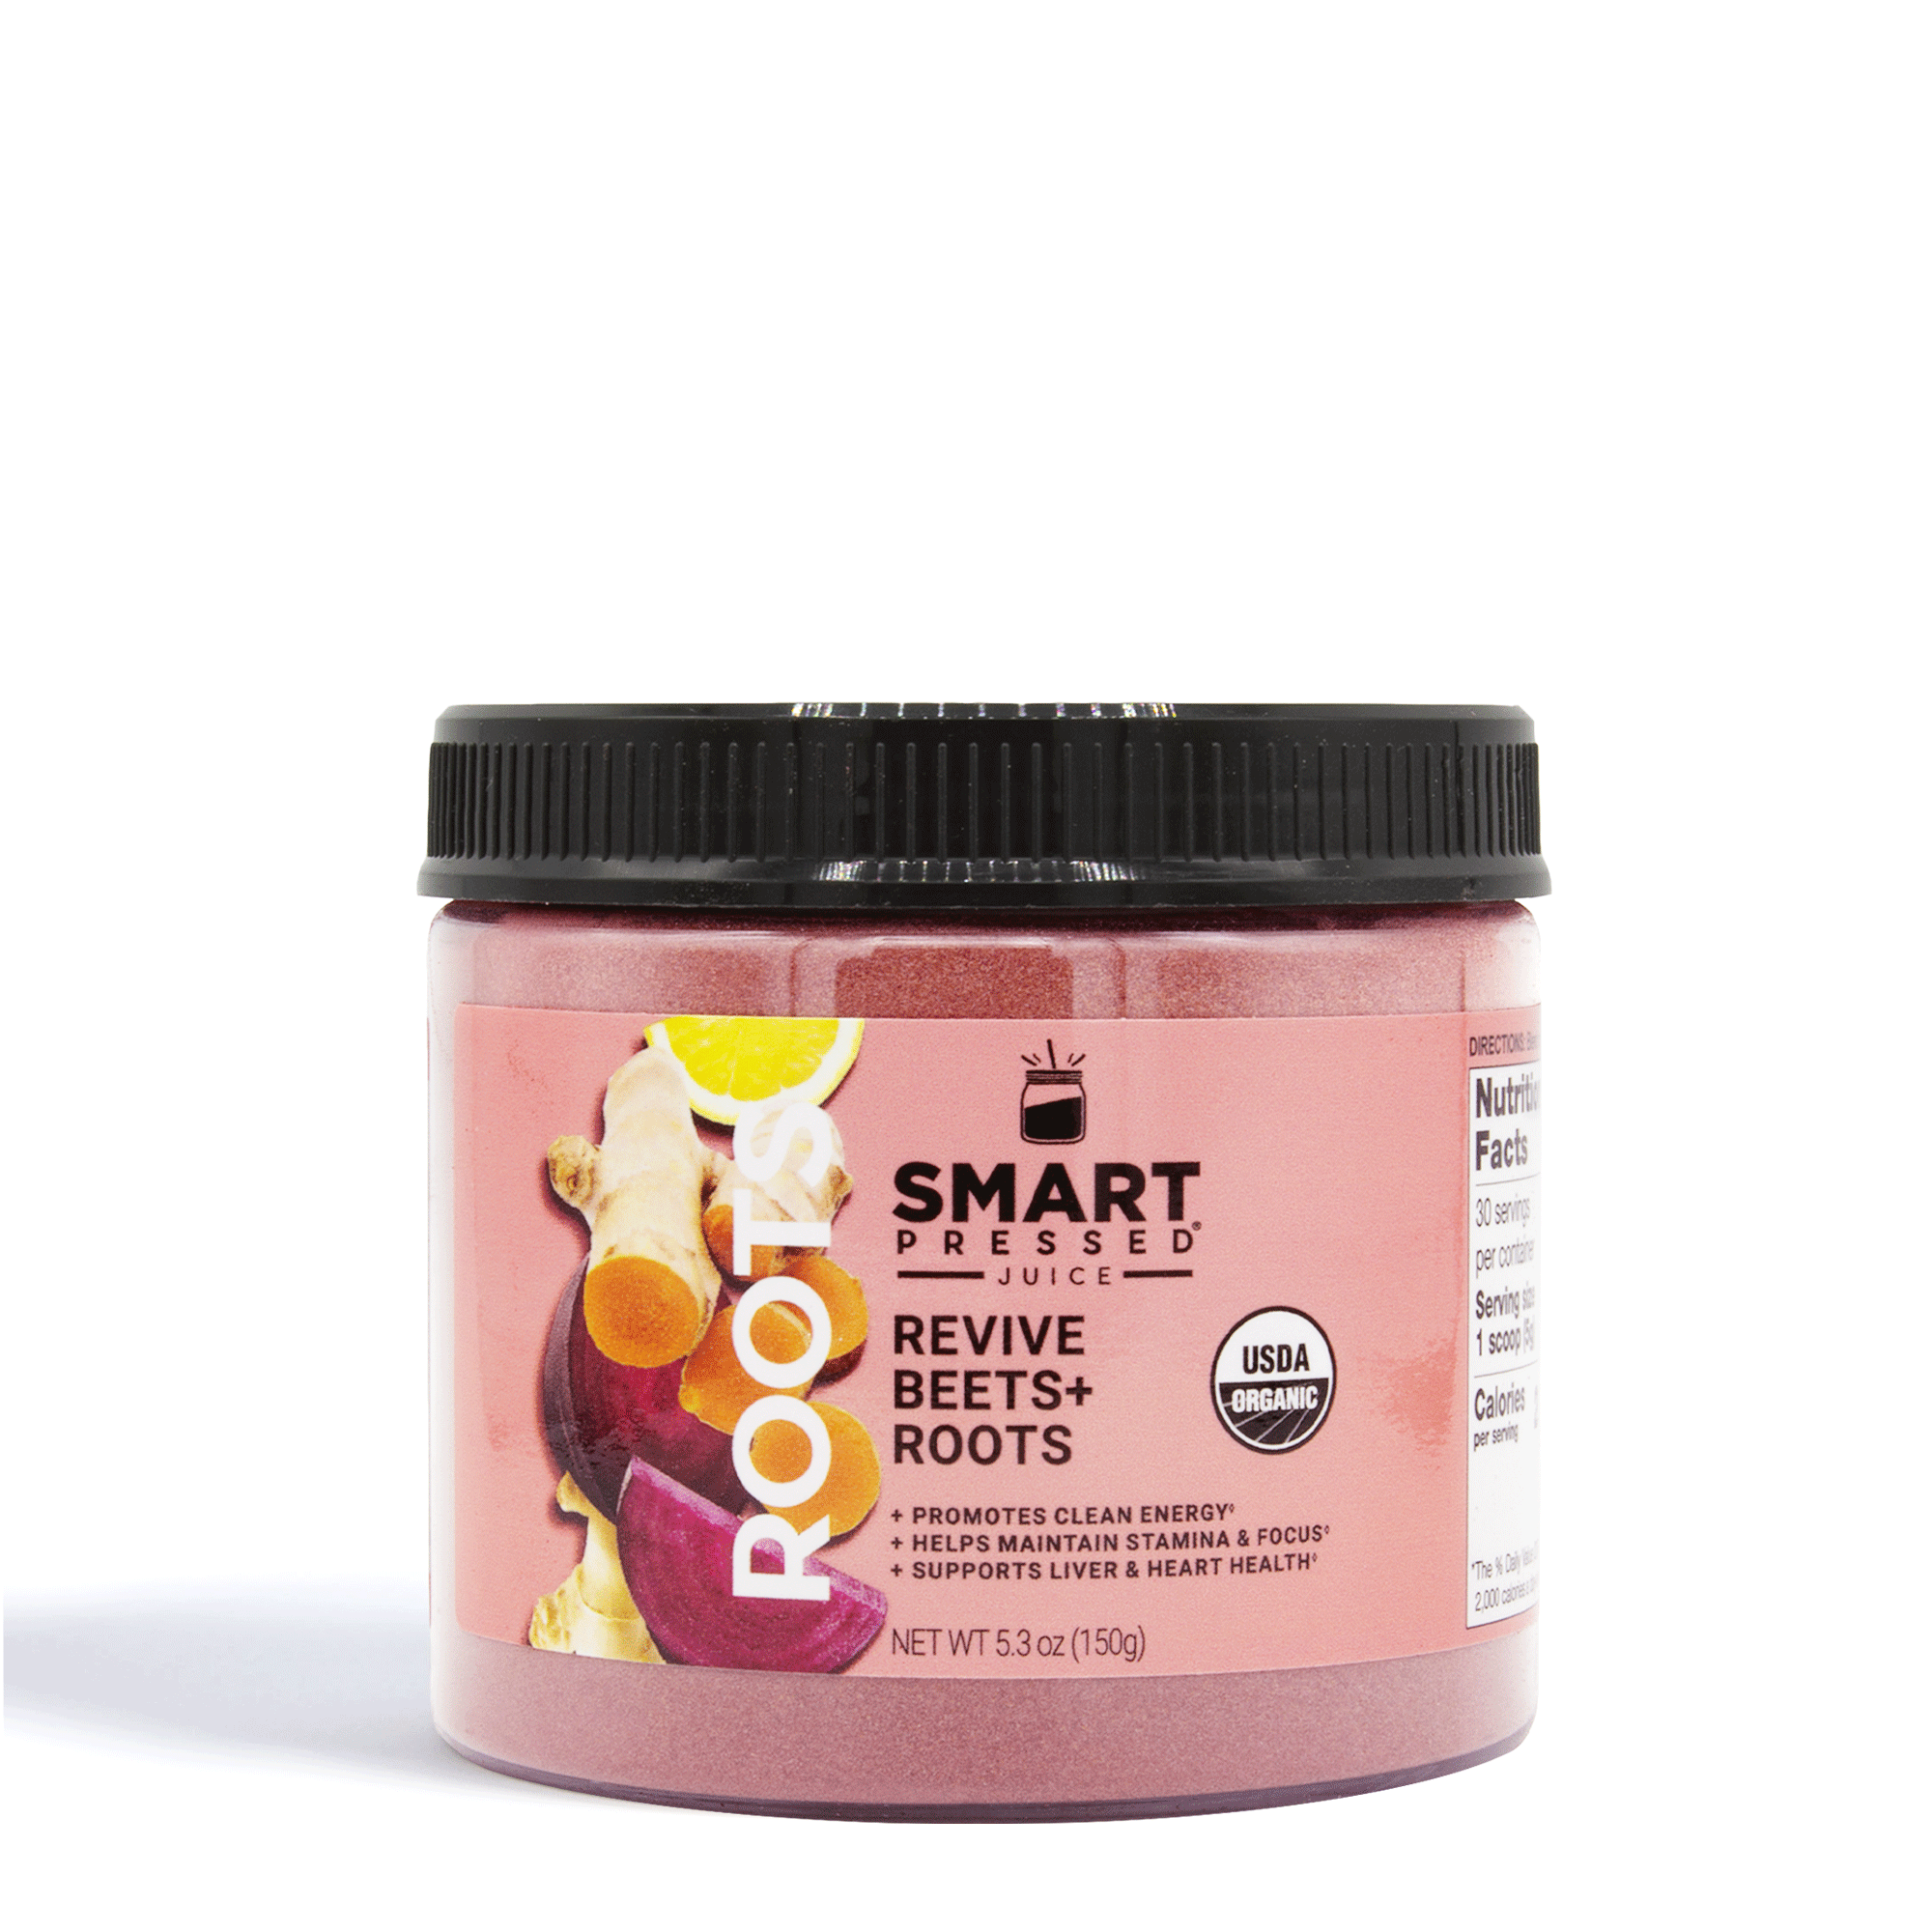 One jar of 150 grams of Revive Beet+Roots against a white background.